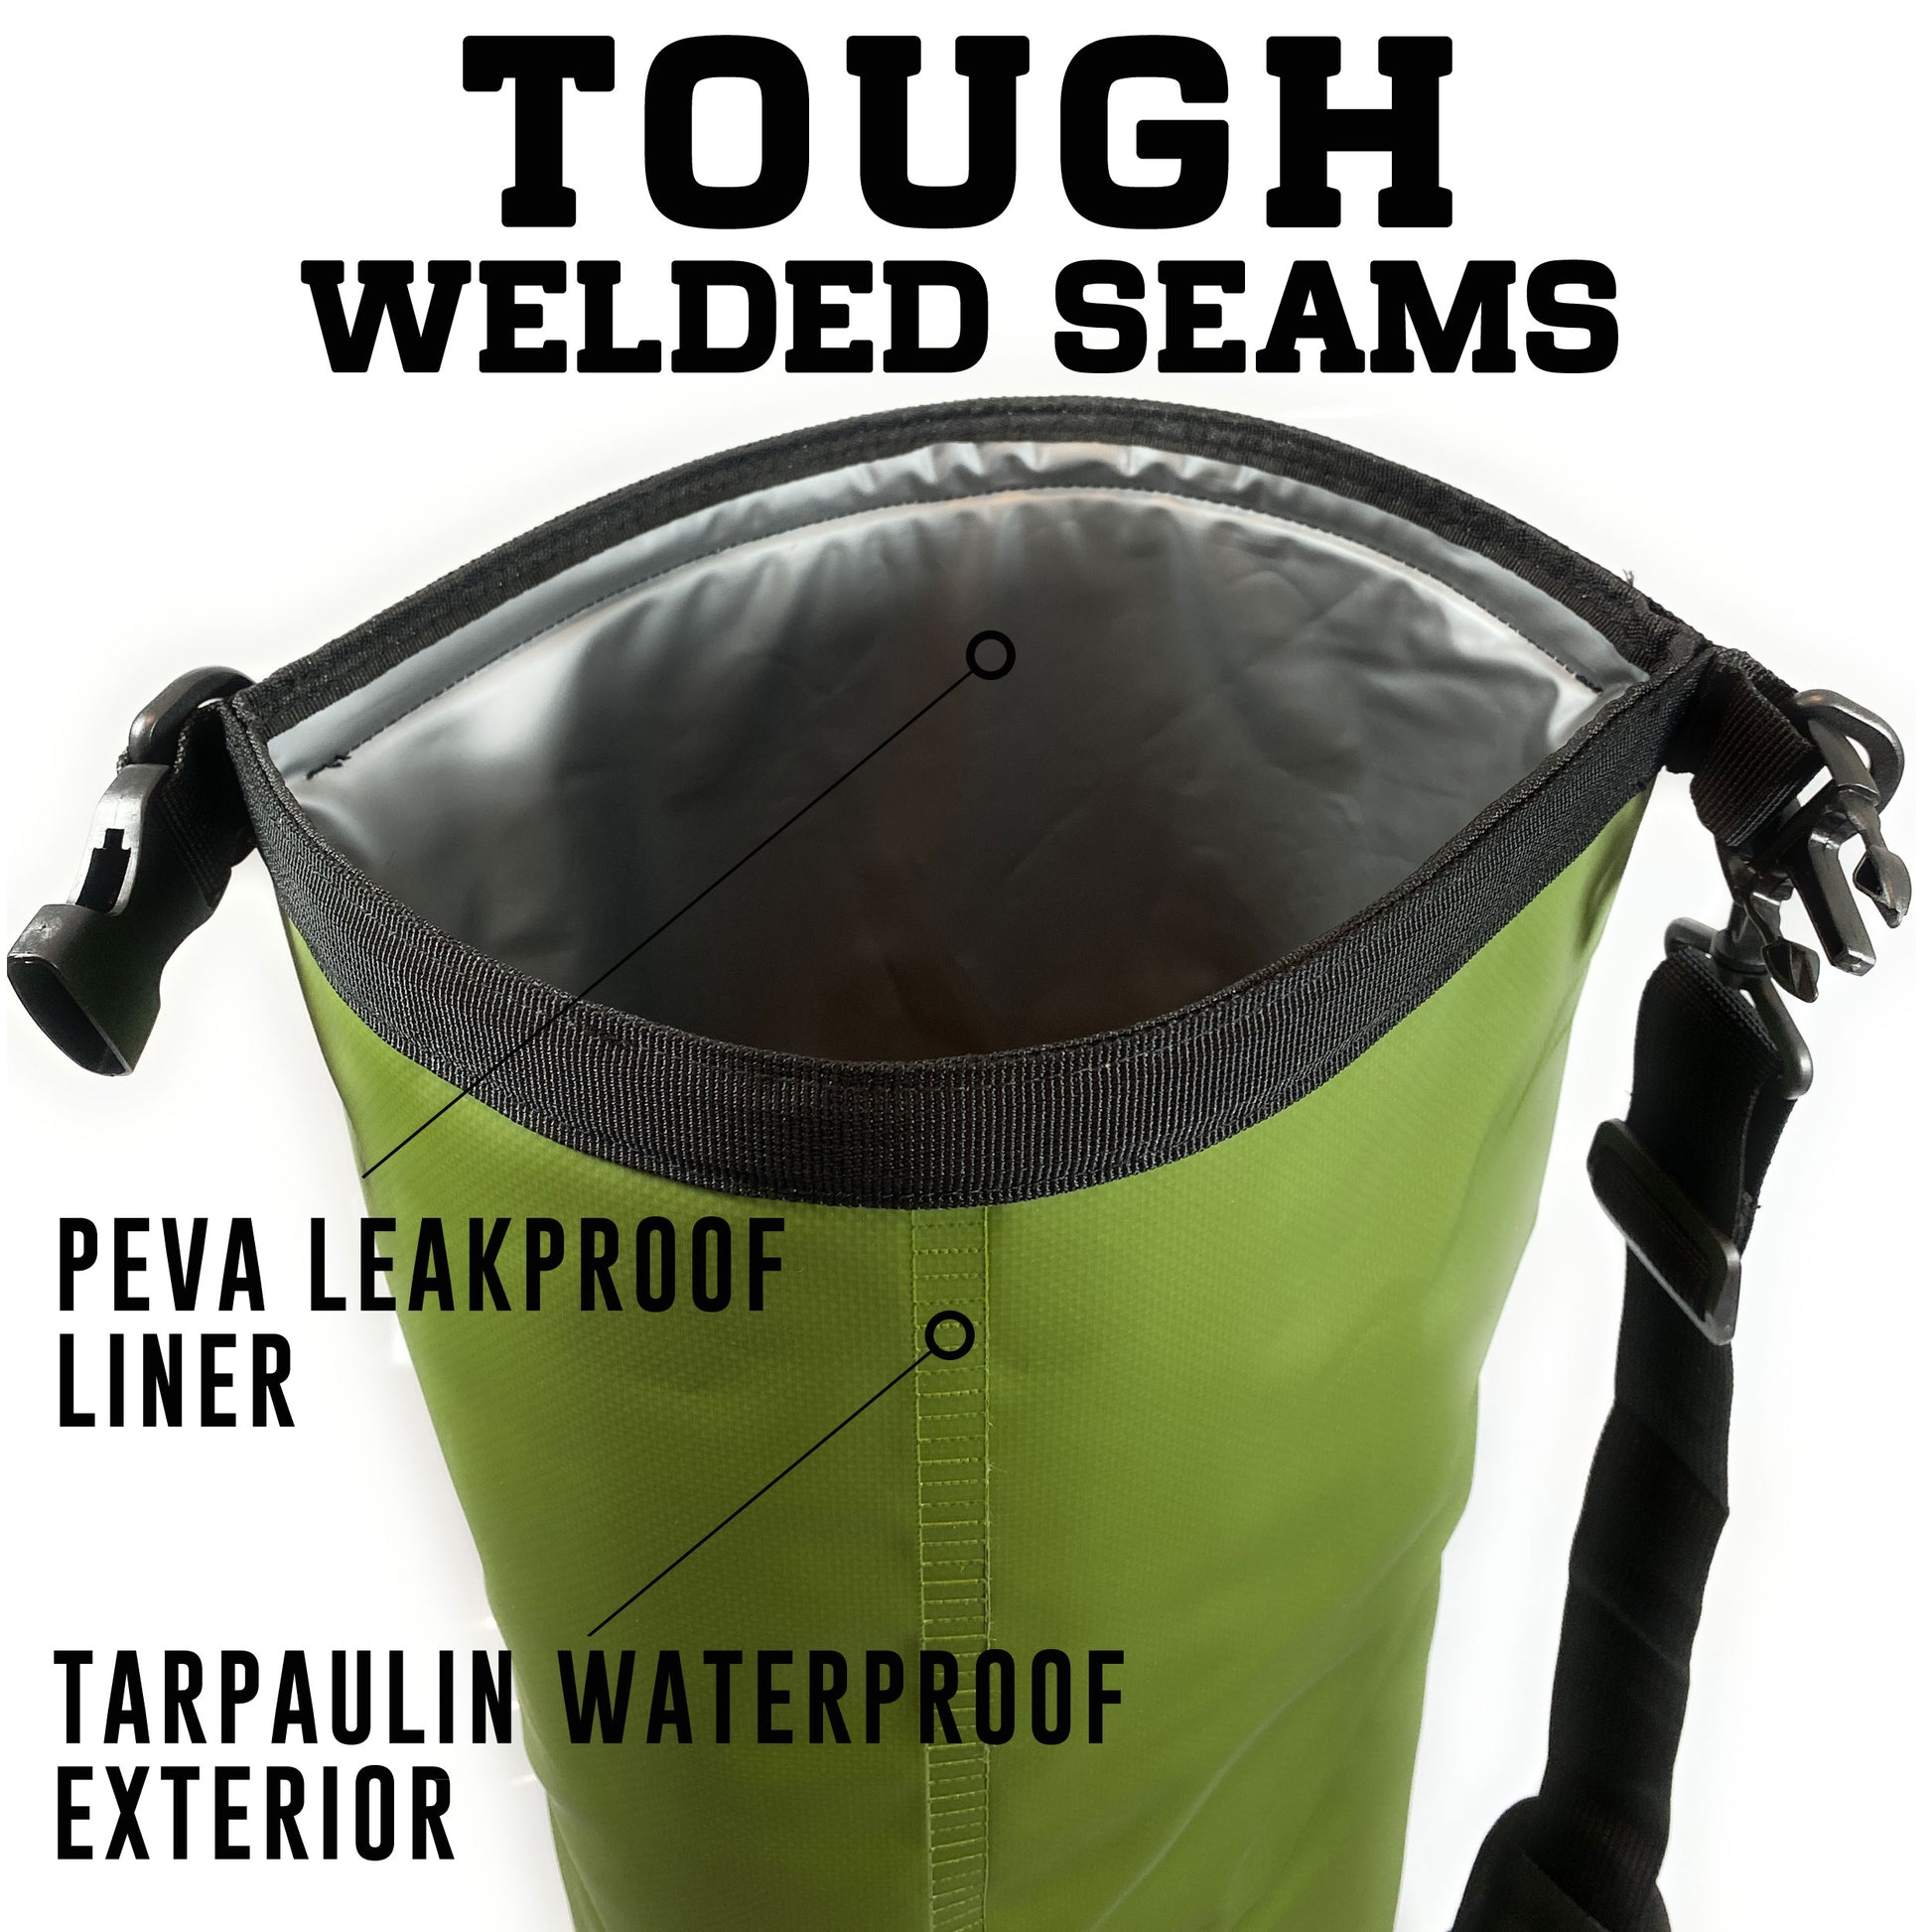 Insulated Dry Bag - Showing Tough Welded Seams